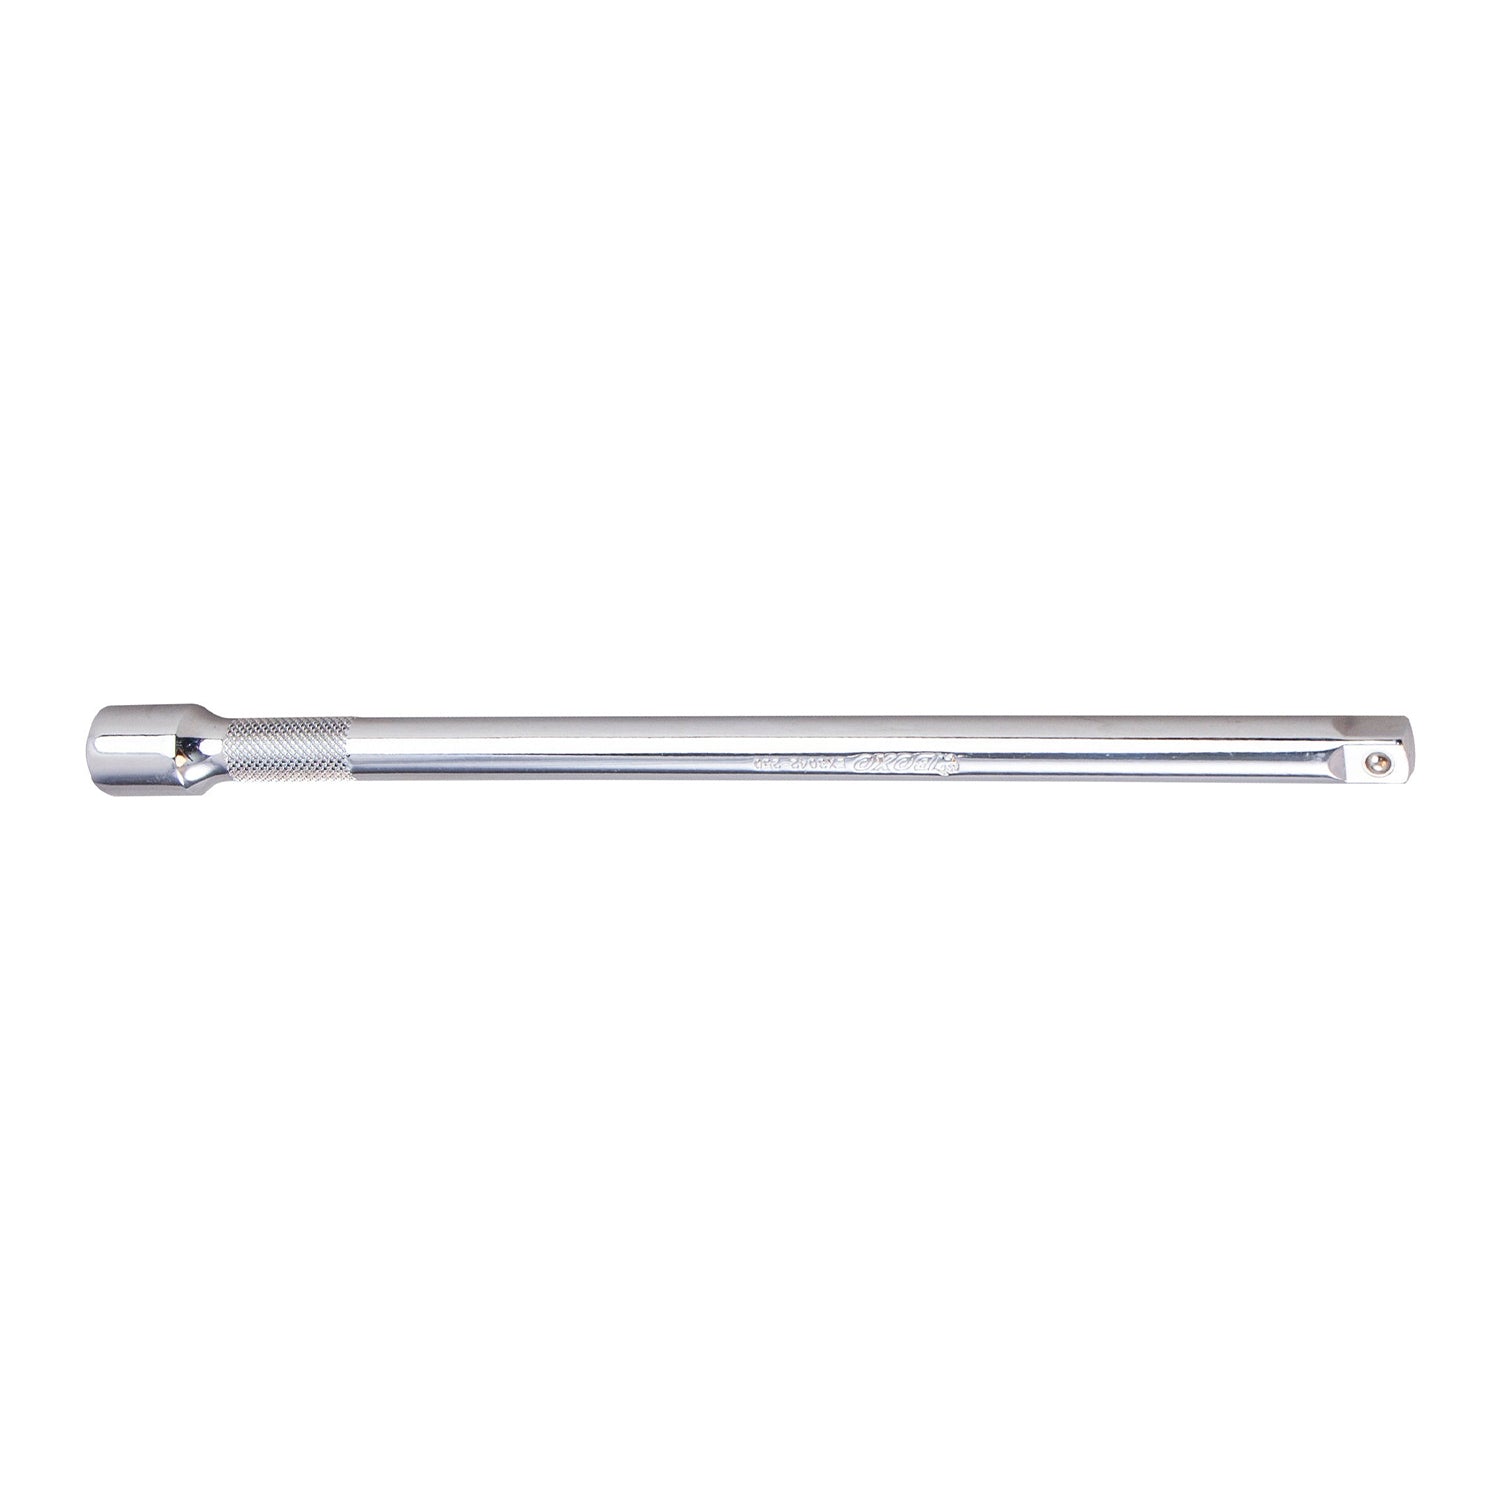 BOXO 3/8" Extension Bars - Sizes 45 to 250mm